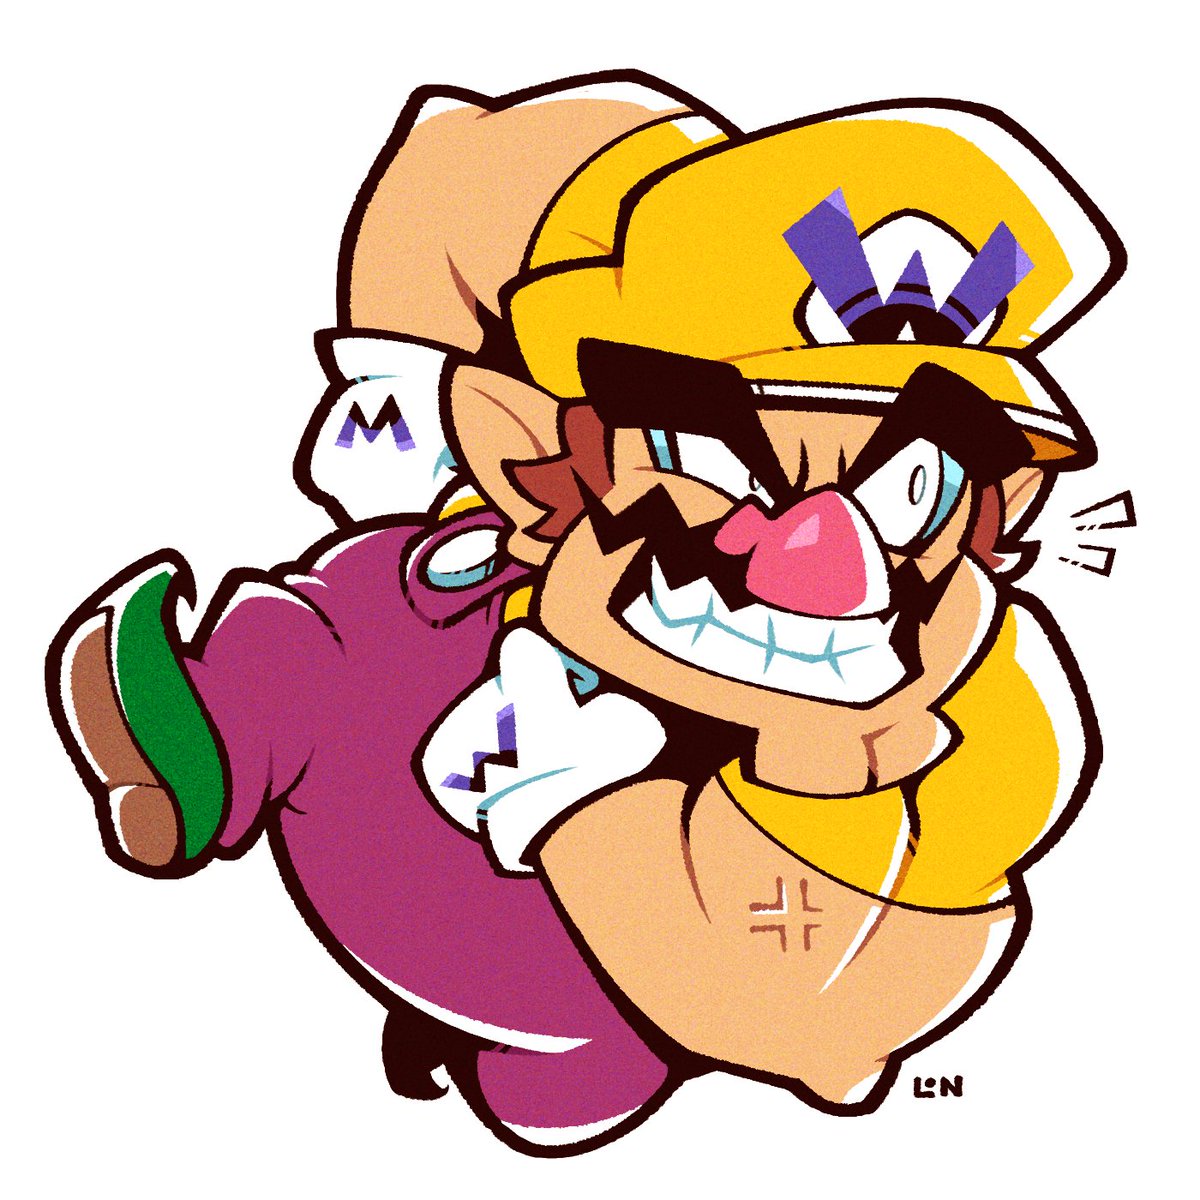 「Long live Wario Land 」|Brian Mのイラスト